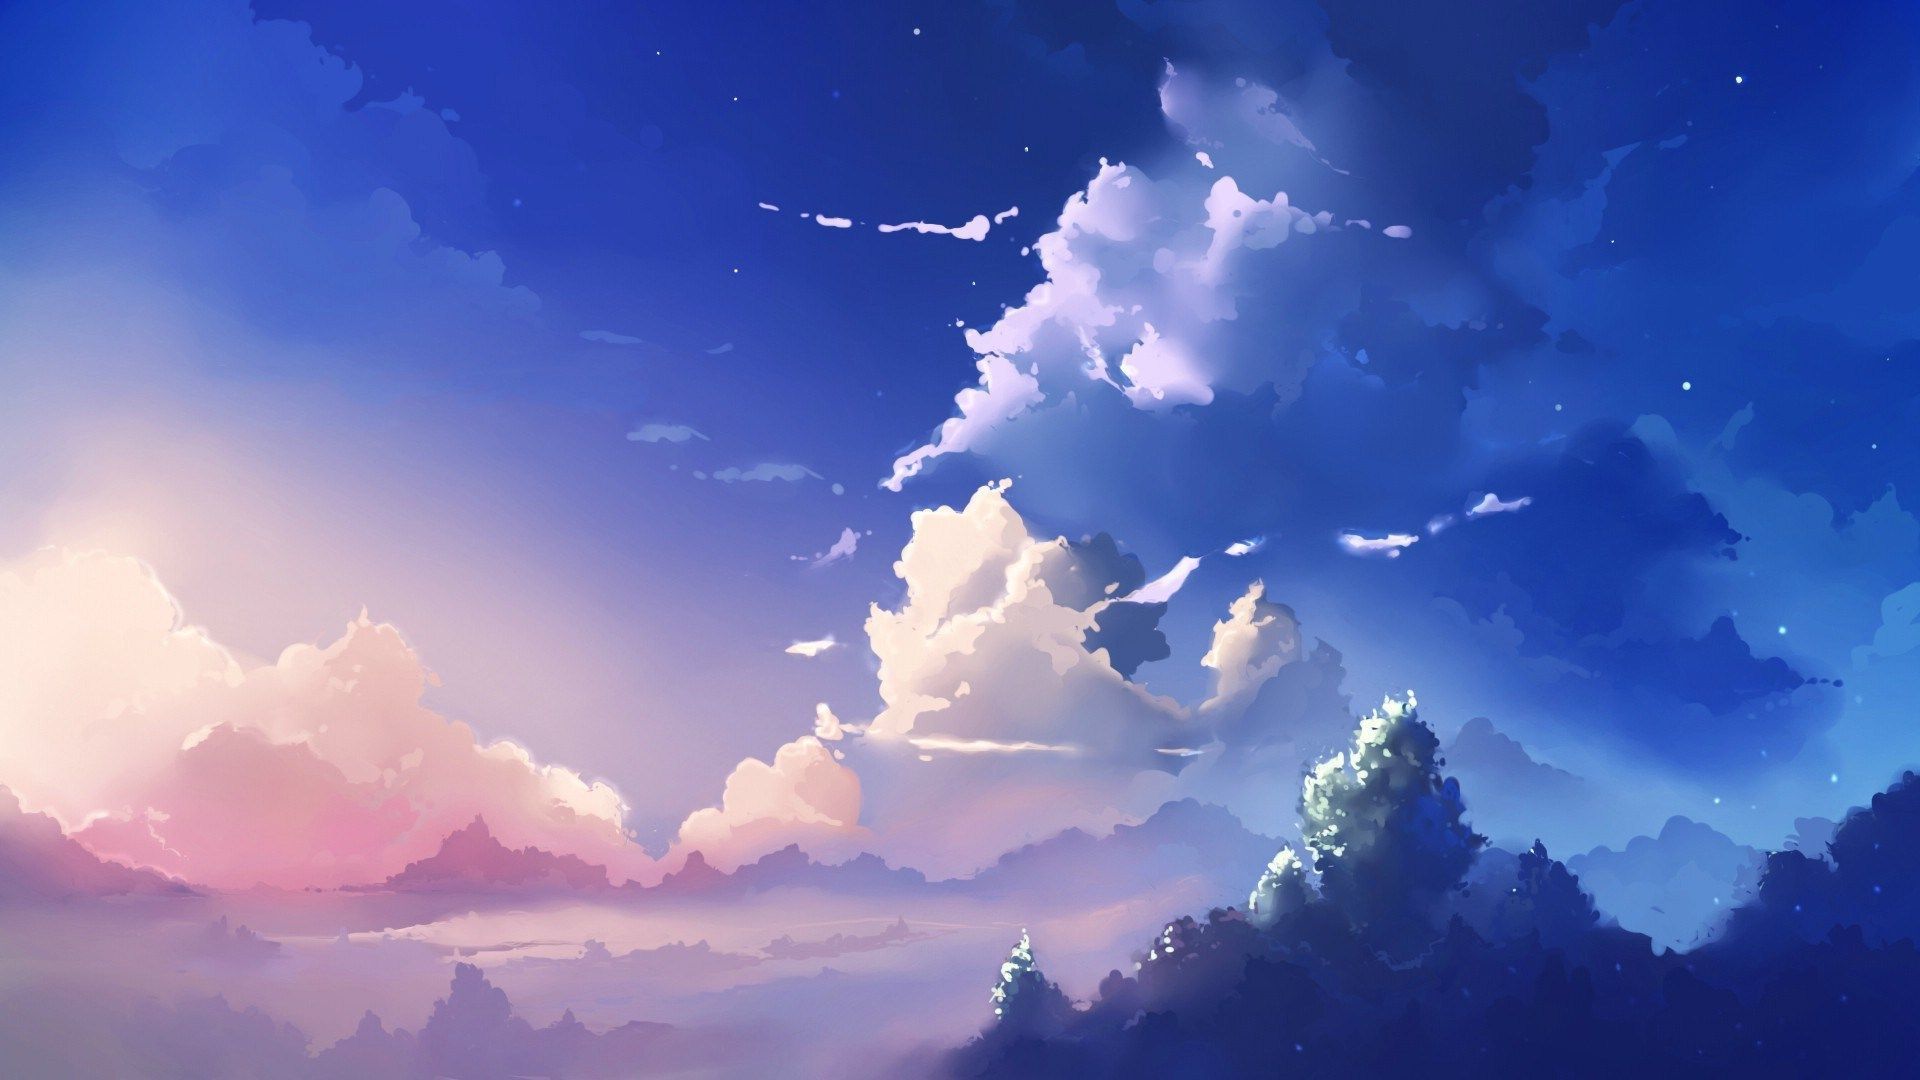 Draw anime style background, game, landscape, environment art by Liviojoos  | Fiverr